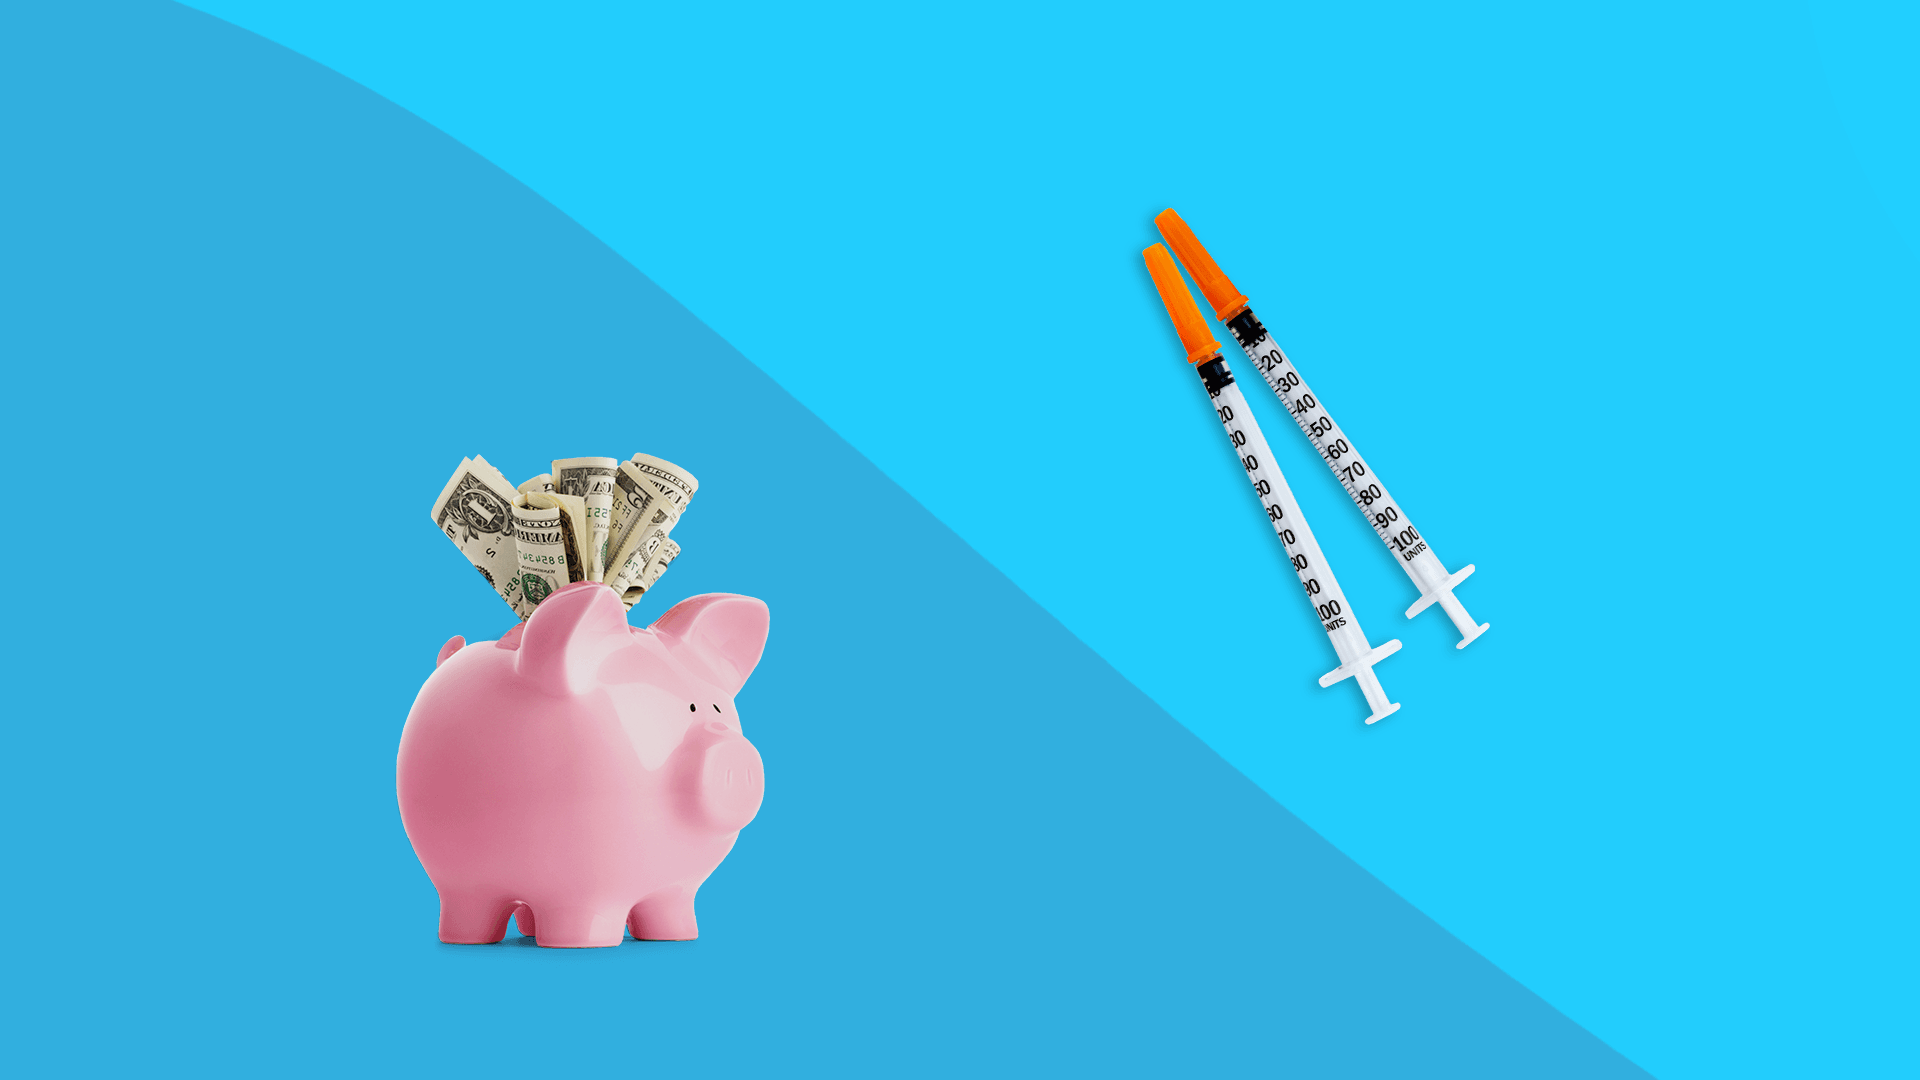 A piggy bank and syringes represent how much is insulin without insurance